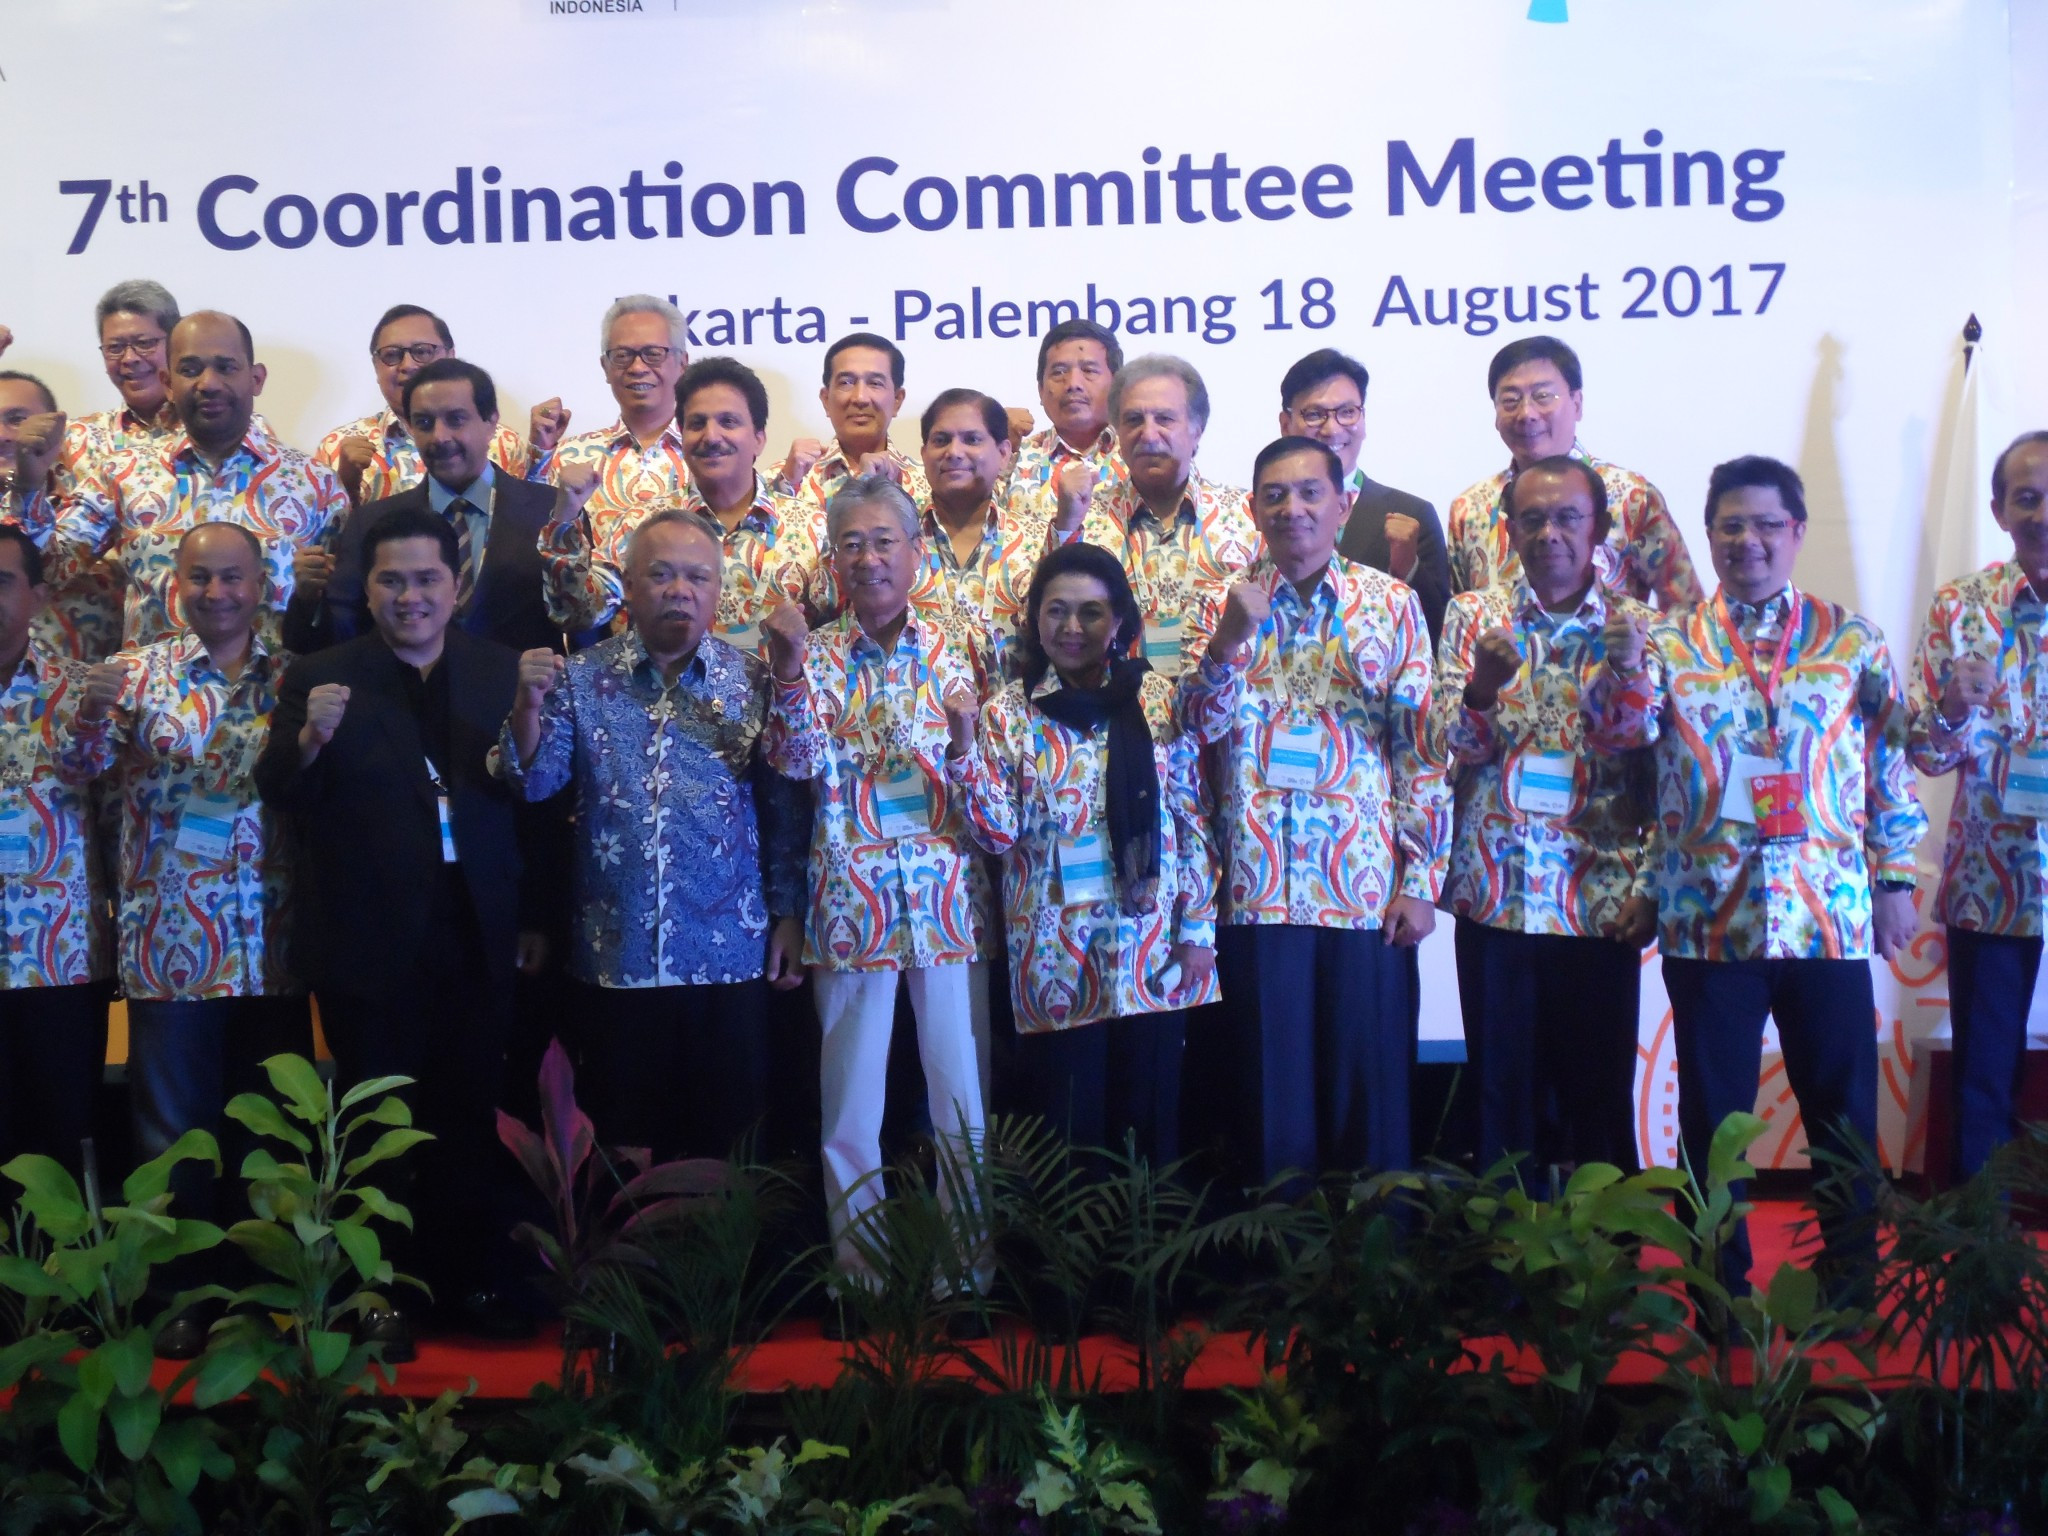 Delegates and officials celebrate a productive and successful 7th Coordination Committee meeting in Jakarta exactly a year before the 18th Asian Games get underway there ©OCA